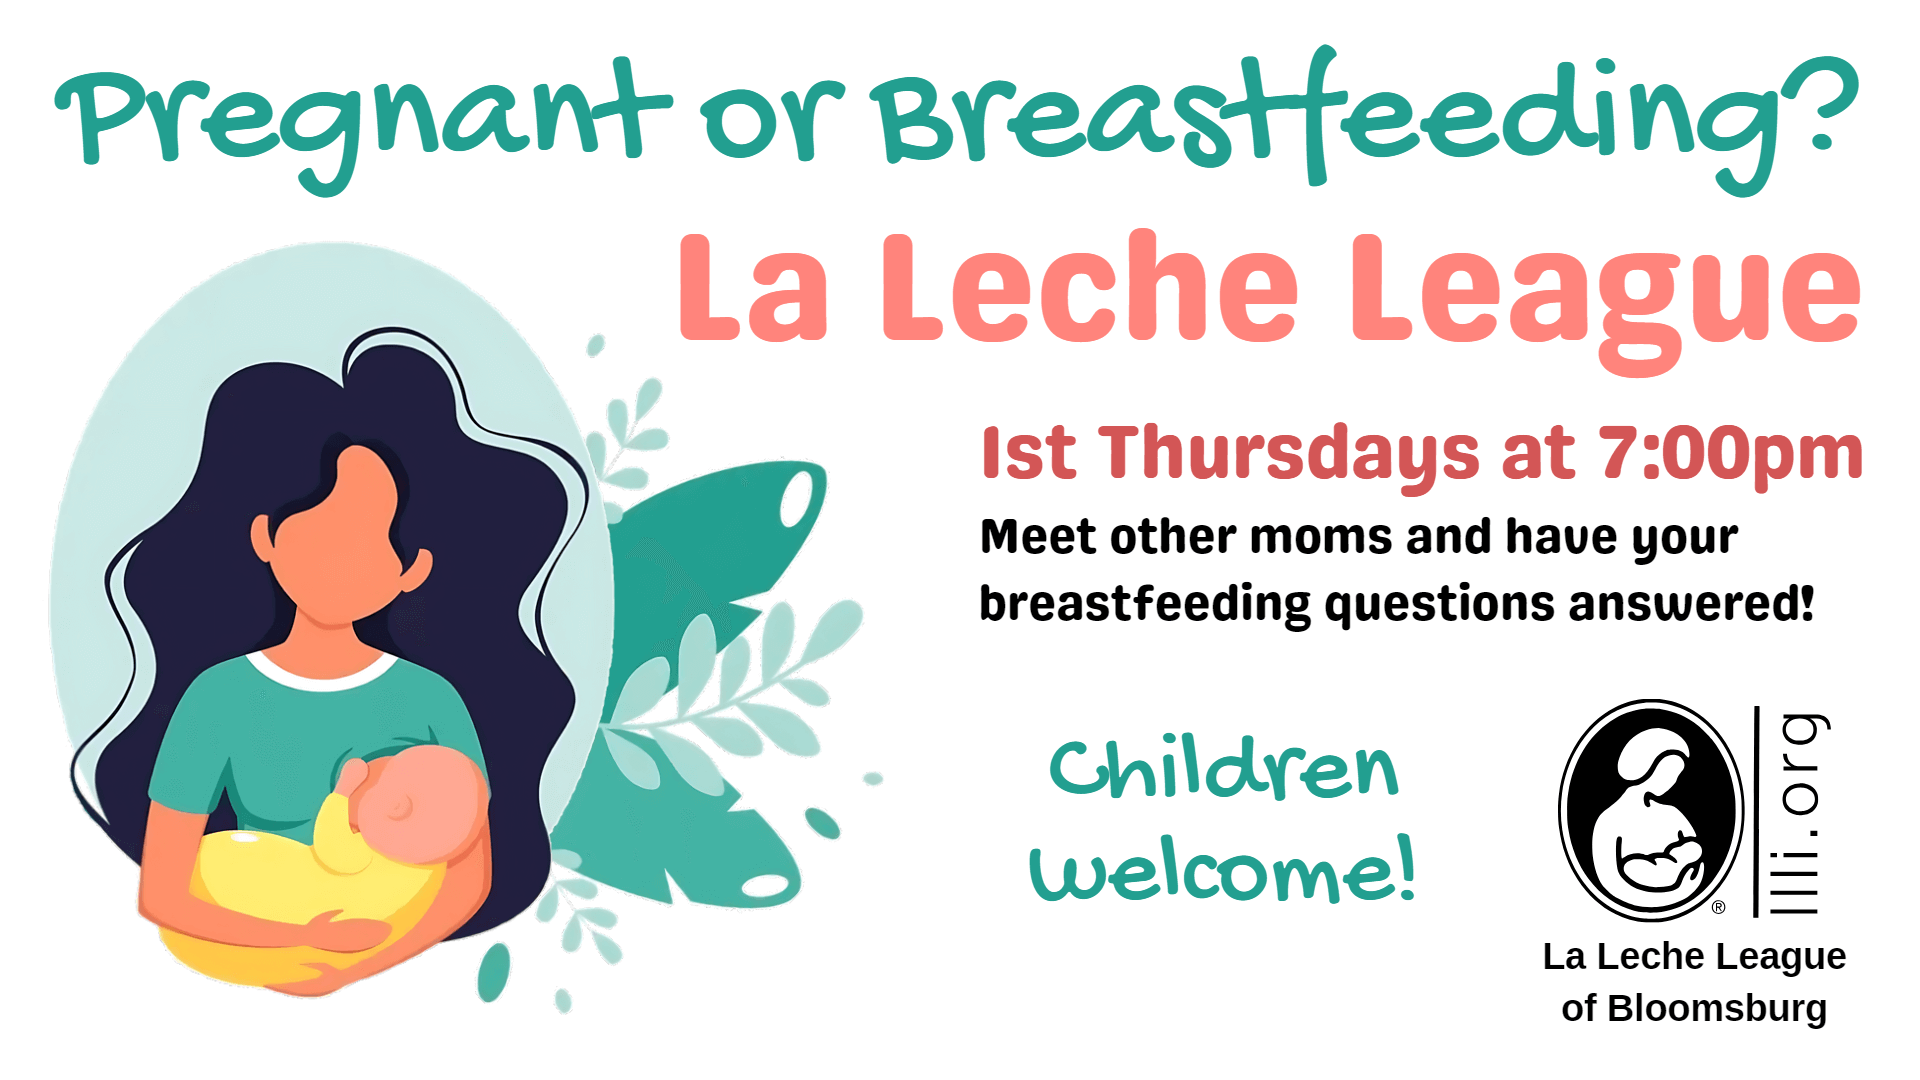 The image is an advertisement for La Leche League meetings at Bloomsburg. The top text in large, teal letters reads, 'Pregnant or Breastfeeding?' Below it, in large pink letters, it says, 'La Leche League.' The details are provided in red and black text: '1st Thursdays at 7:00pm. Meet other moms and have your breastfeeding questions answered!' On the right side, there is a logo for La Leche League with an illustration of a mother breastfeeding her baby and the text 'La Leche League of Bloomsburg' below it. On the left side, there is an illustration of a woman with long dark hair holding a baby, set against a light blue background with green leaves. The text 'Children welcome!' is written in teal at the bottom.